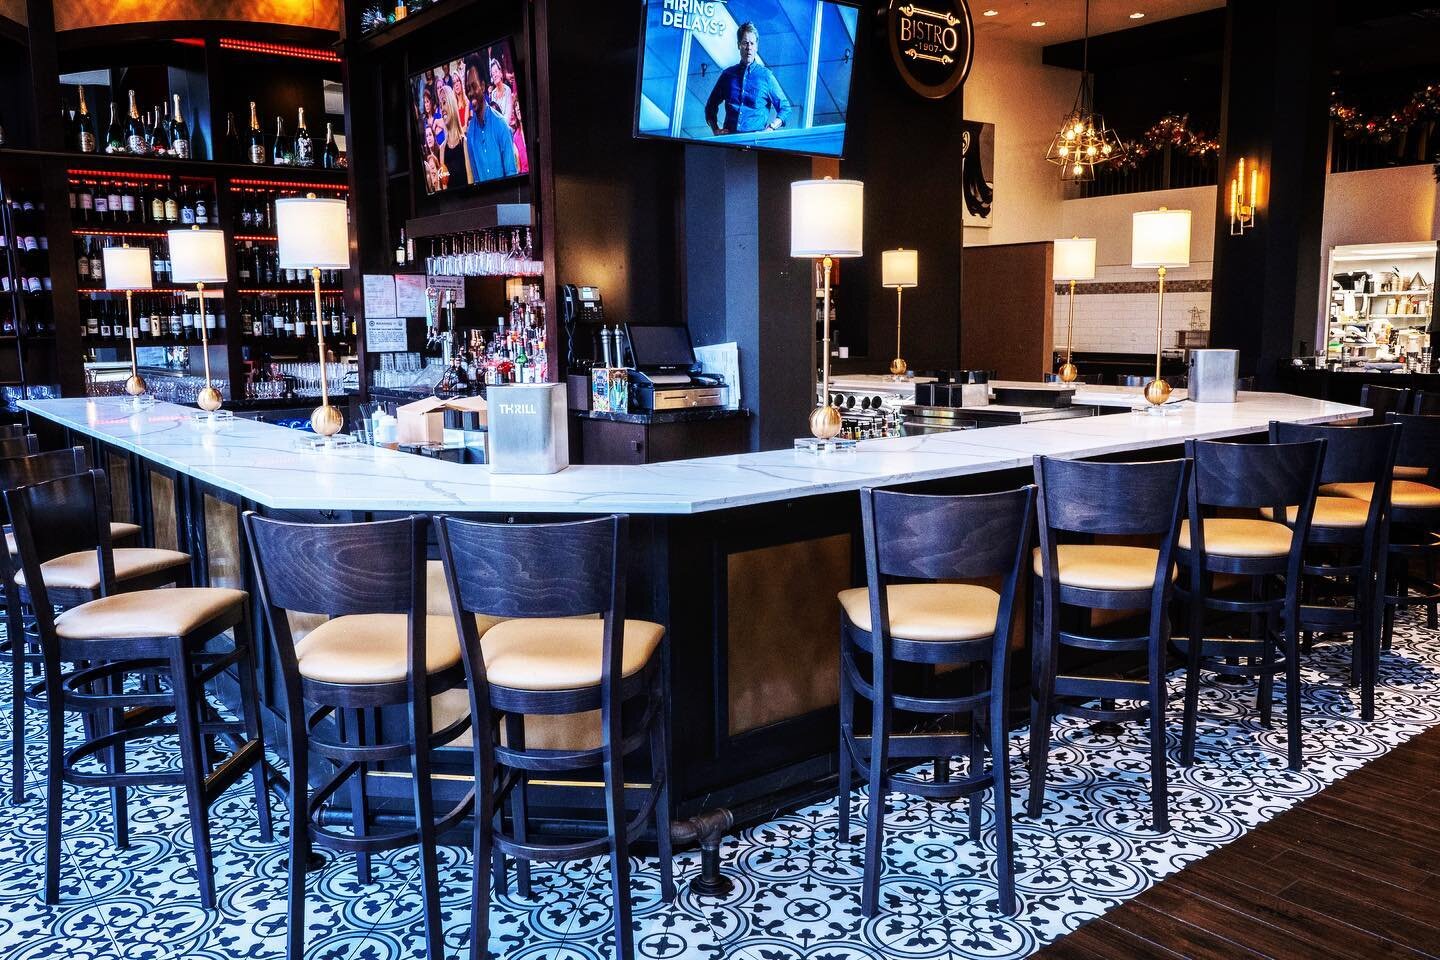 Be sure to get to the @bistro1907bymarkcanzonetta over the holidays it&rsquo;s an amazing experience! Custom wine racks and counter tops by @crowescabinets #iconsofyoungstown #youngstown #foodie